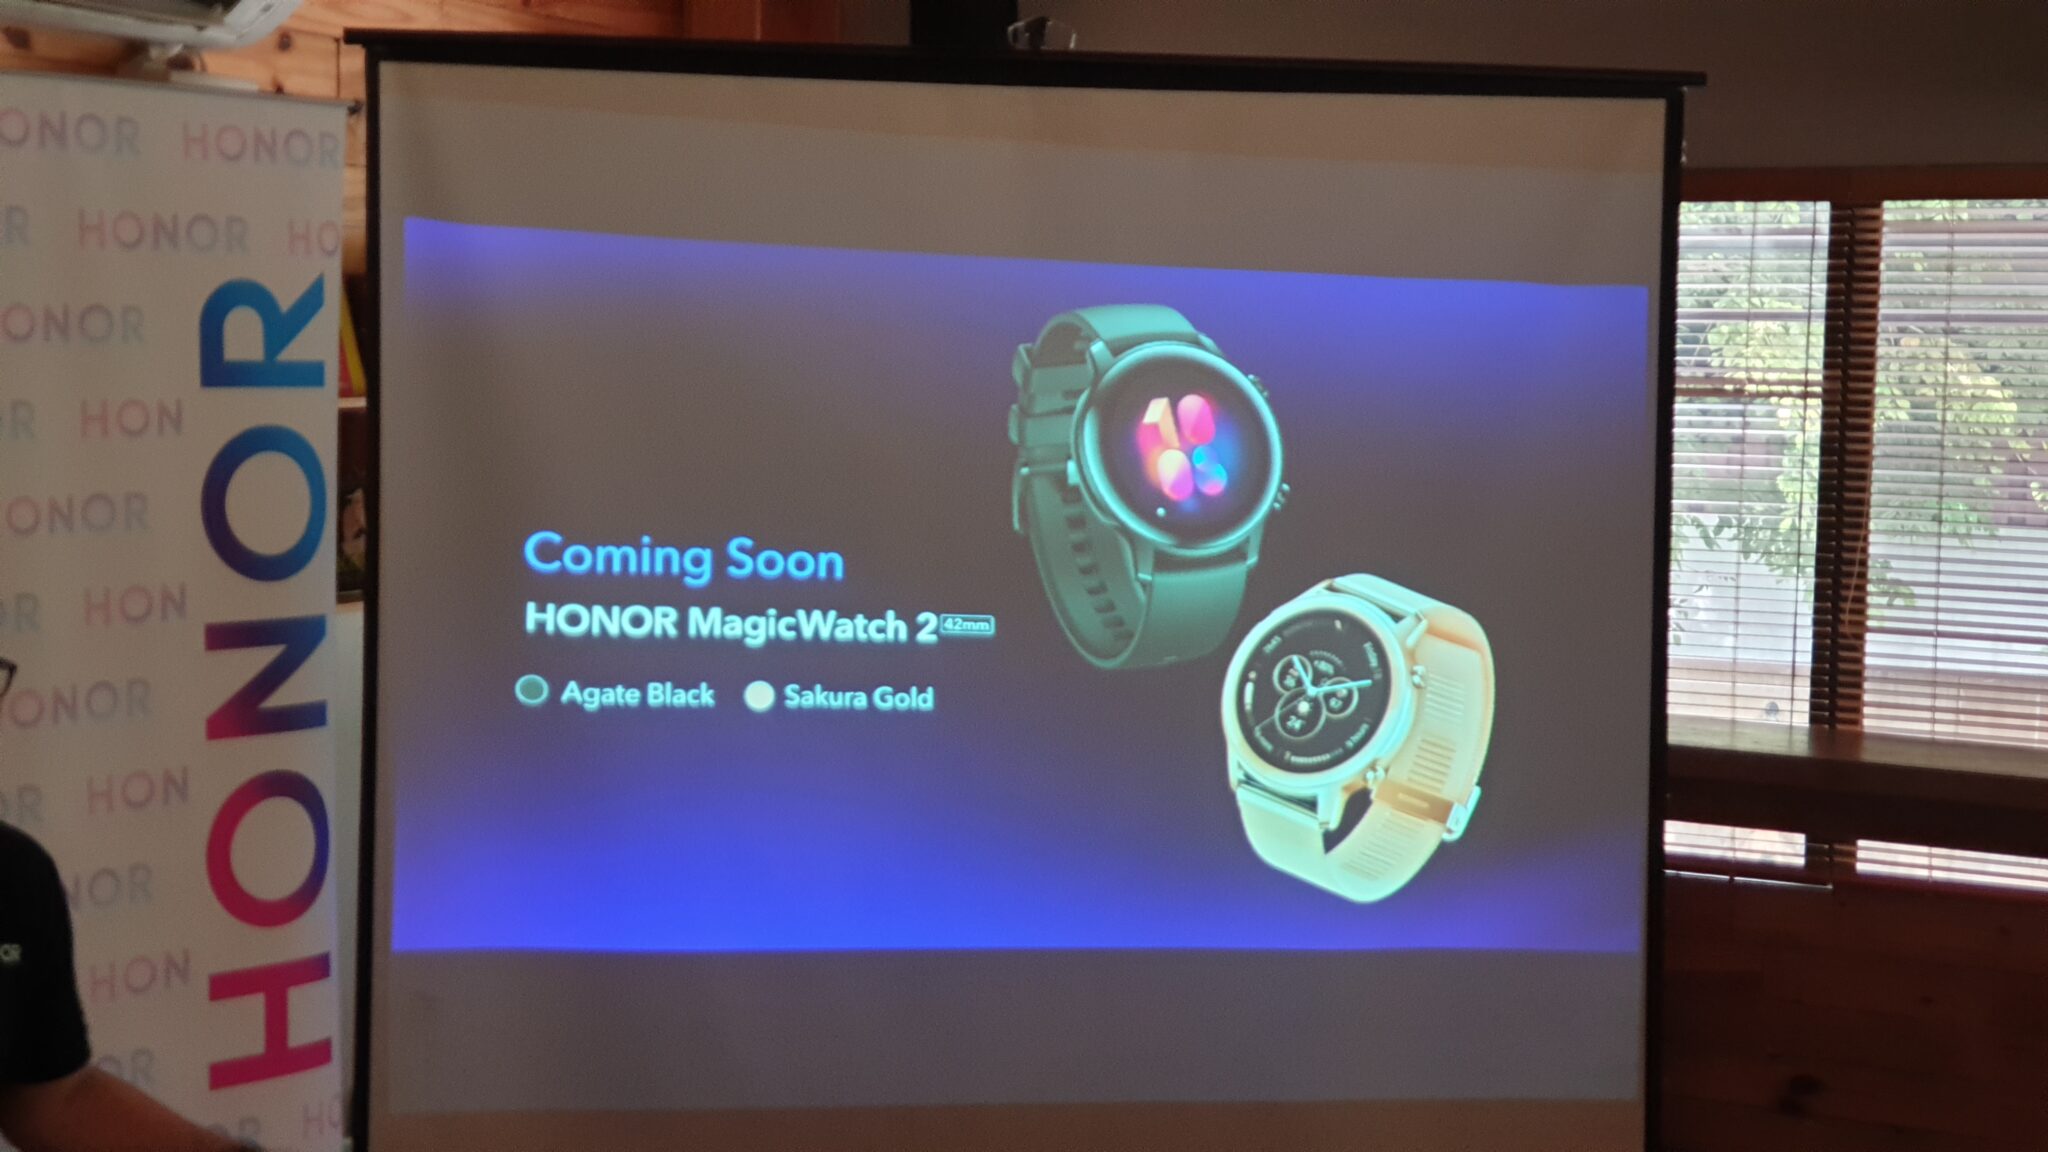 HoNOR MagicWatch 2 42mm